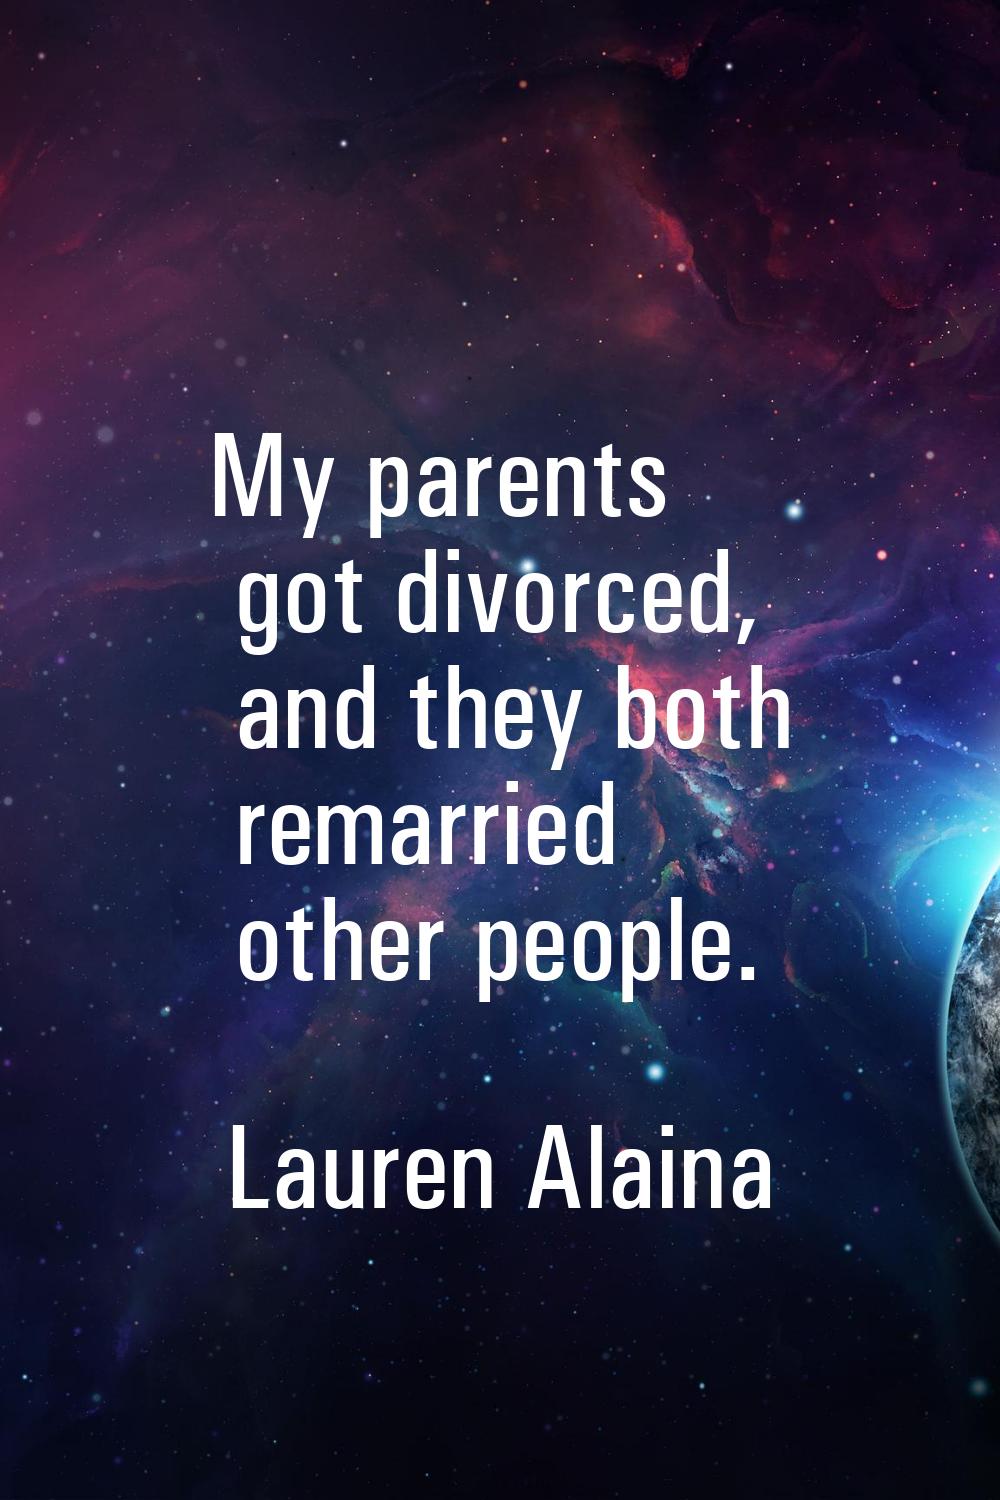 My parents got divorced, and they both remarried other people.